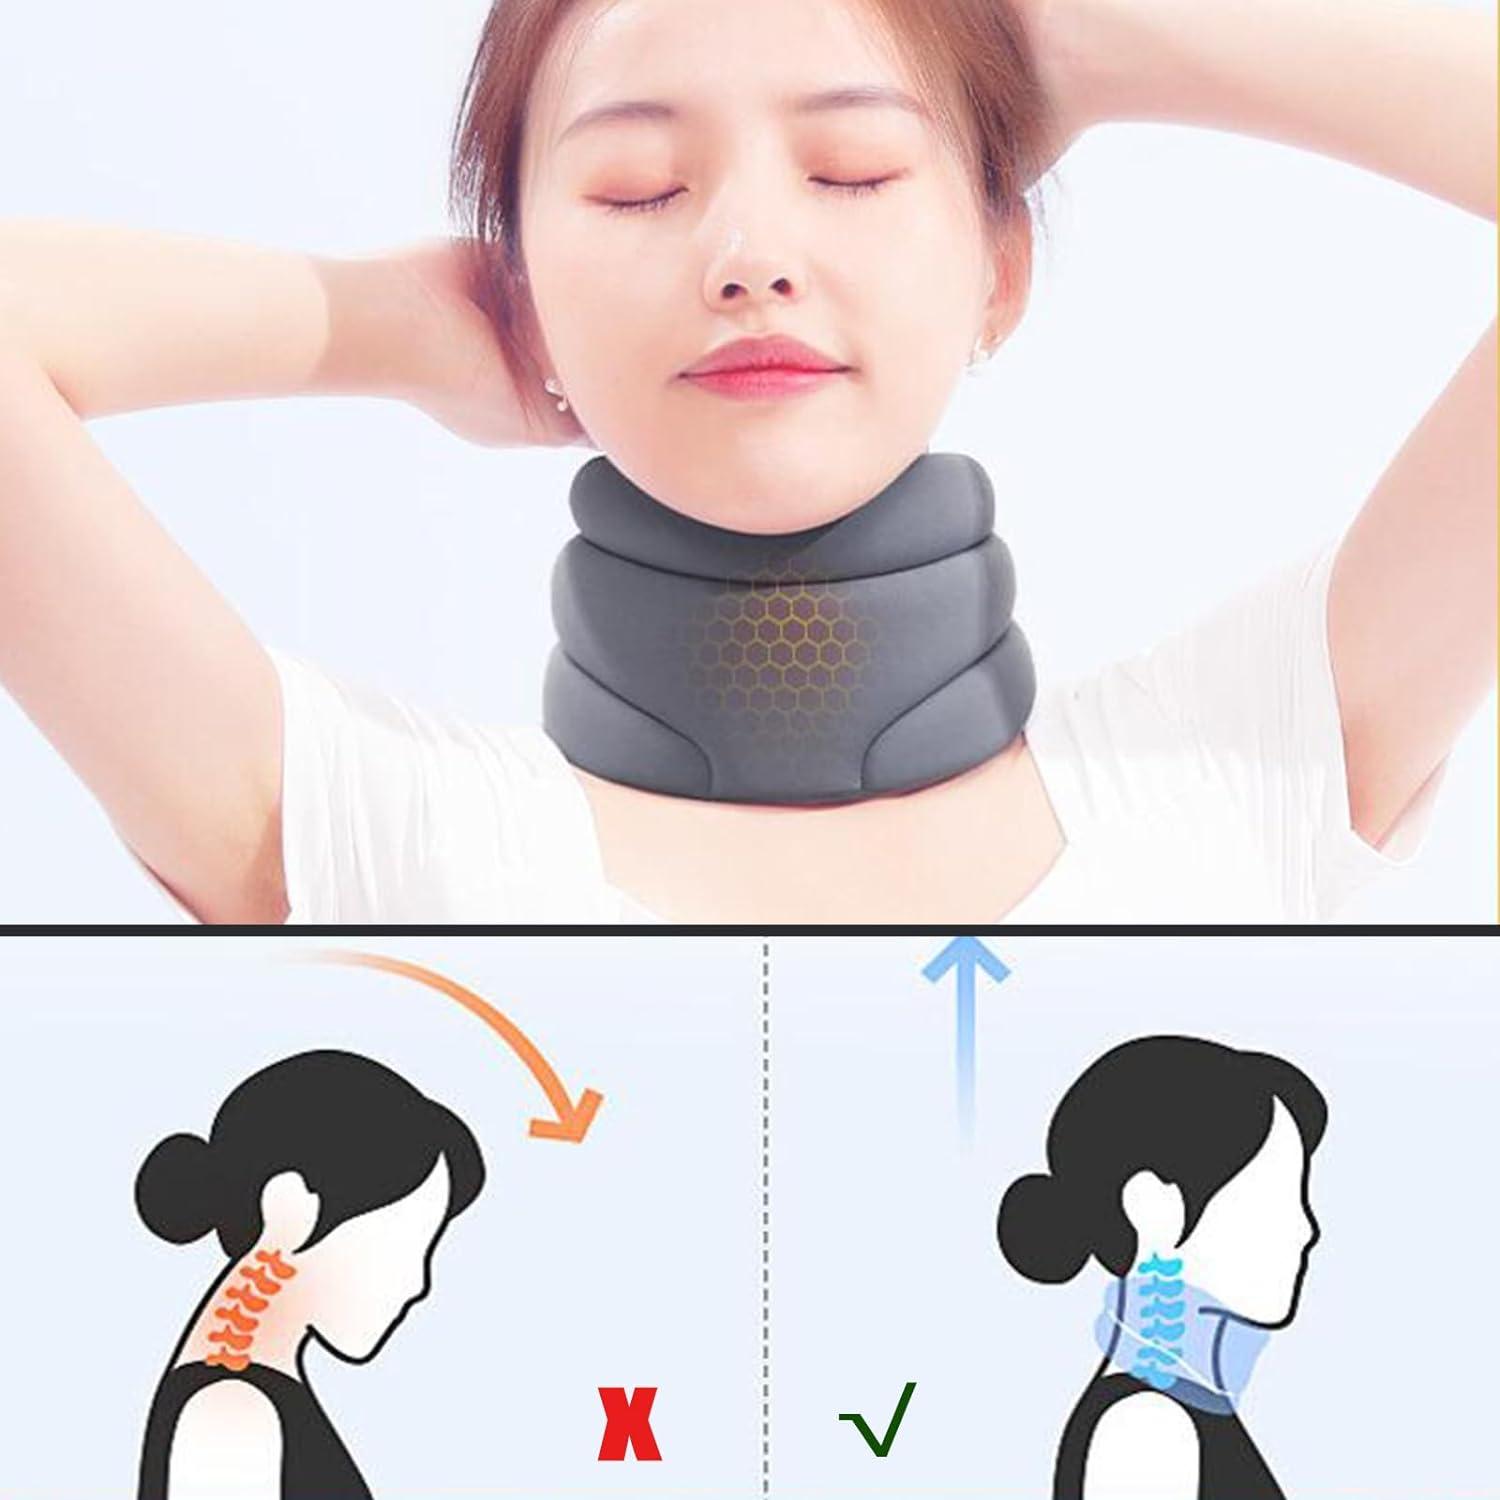 Cervicorrect Neck Brace,Cervicorrect Neck Brace by Healthy Lab Co, Neck  Brace for Sleeping Soft Foam,Neck Support Brace for Pressure Relief for  Women